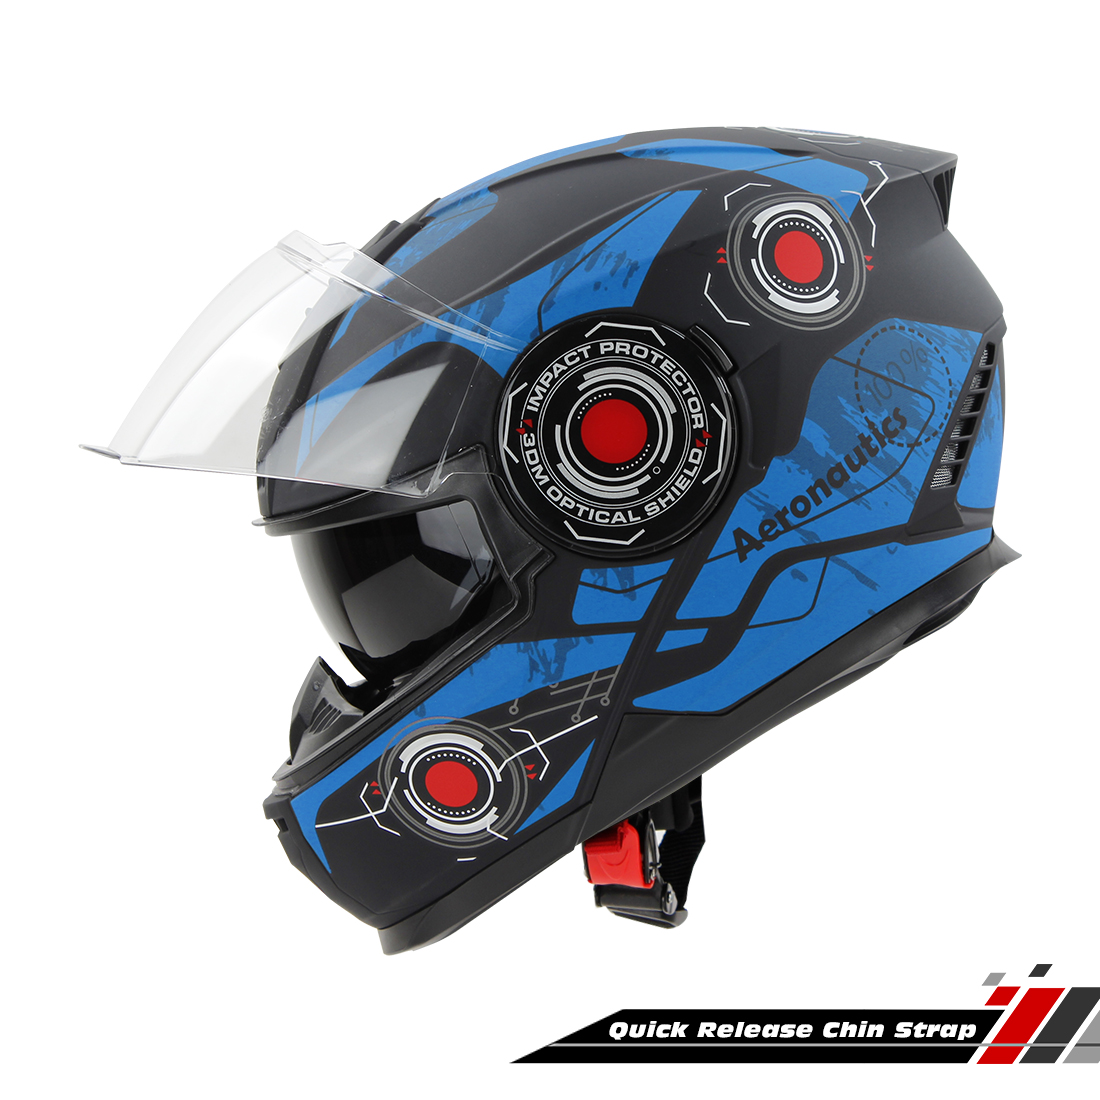 Steelbird SBH-40 Cyber ISI Certified Full Face Graphic Helmet For Men And Women With Inner Sun Shield (Glossy Black Blue)